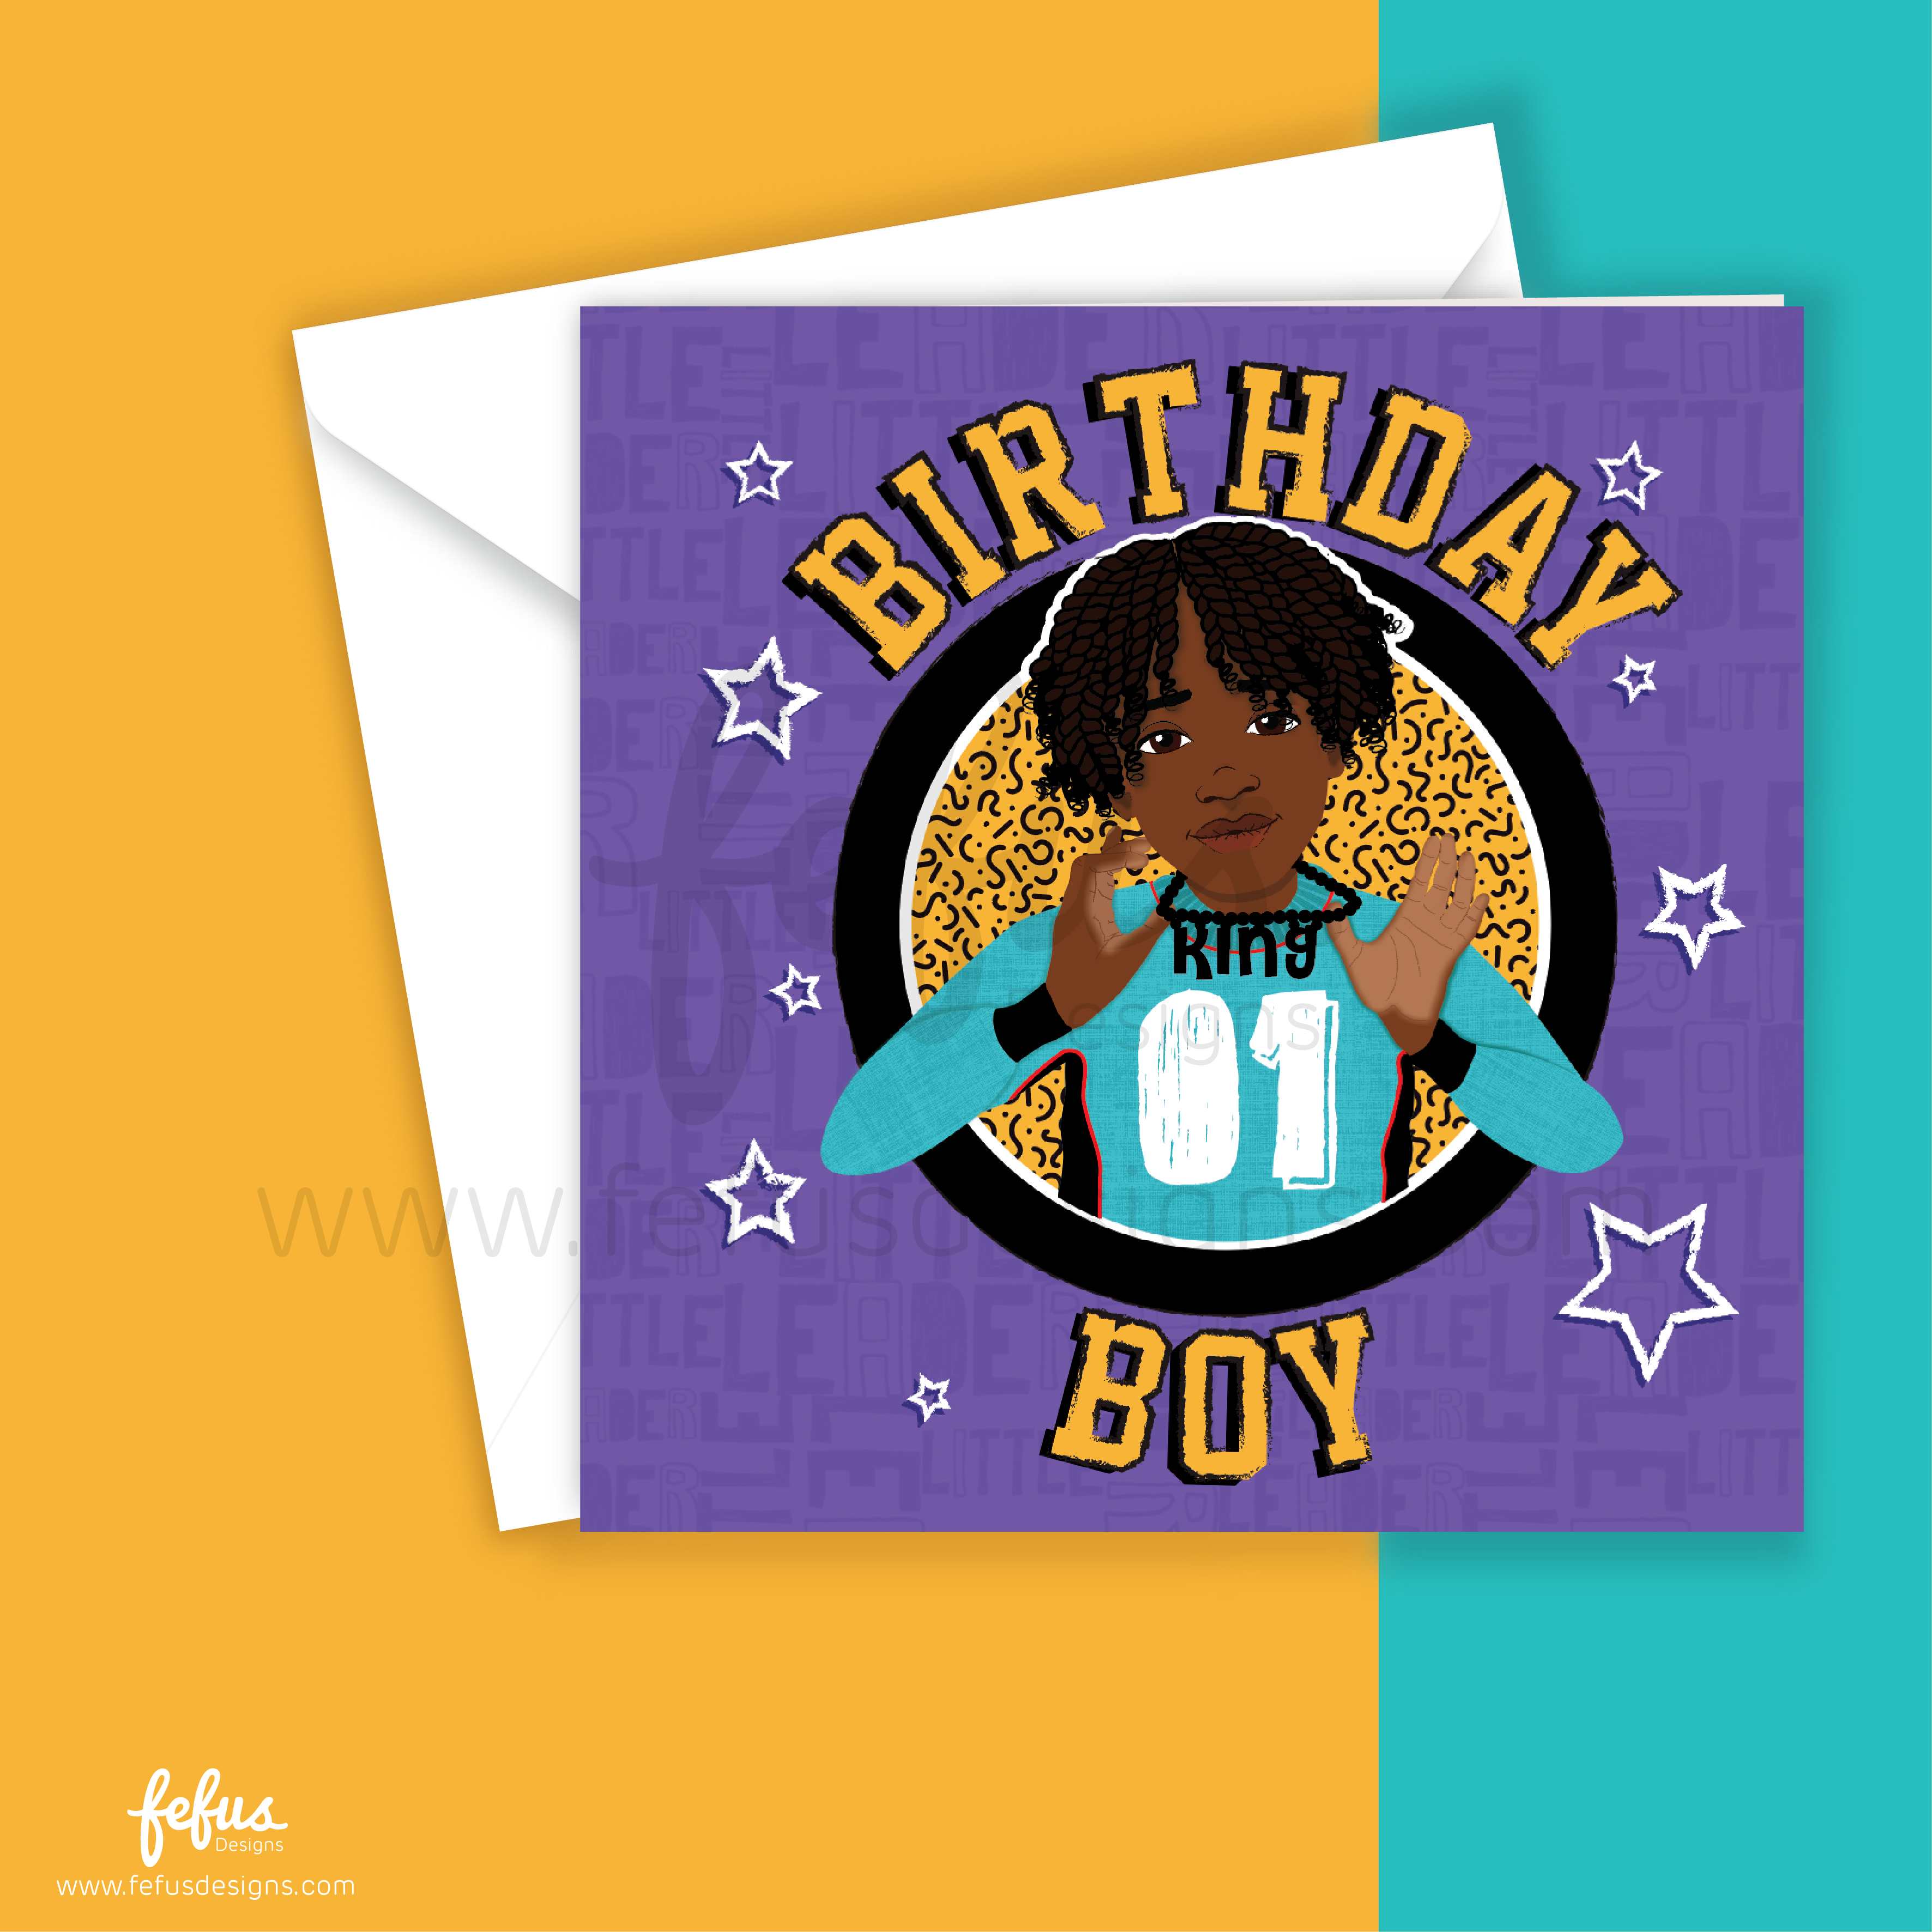 'Birthday Boy' Diverse Boys Birthday Card, Our cards are the perfect addition to a gift or just sent alone, for a little one who wants to see someone who looks just like themselves!